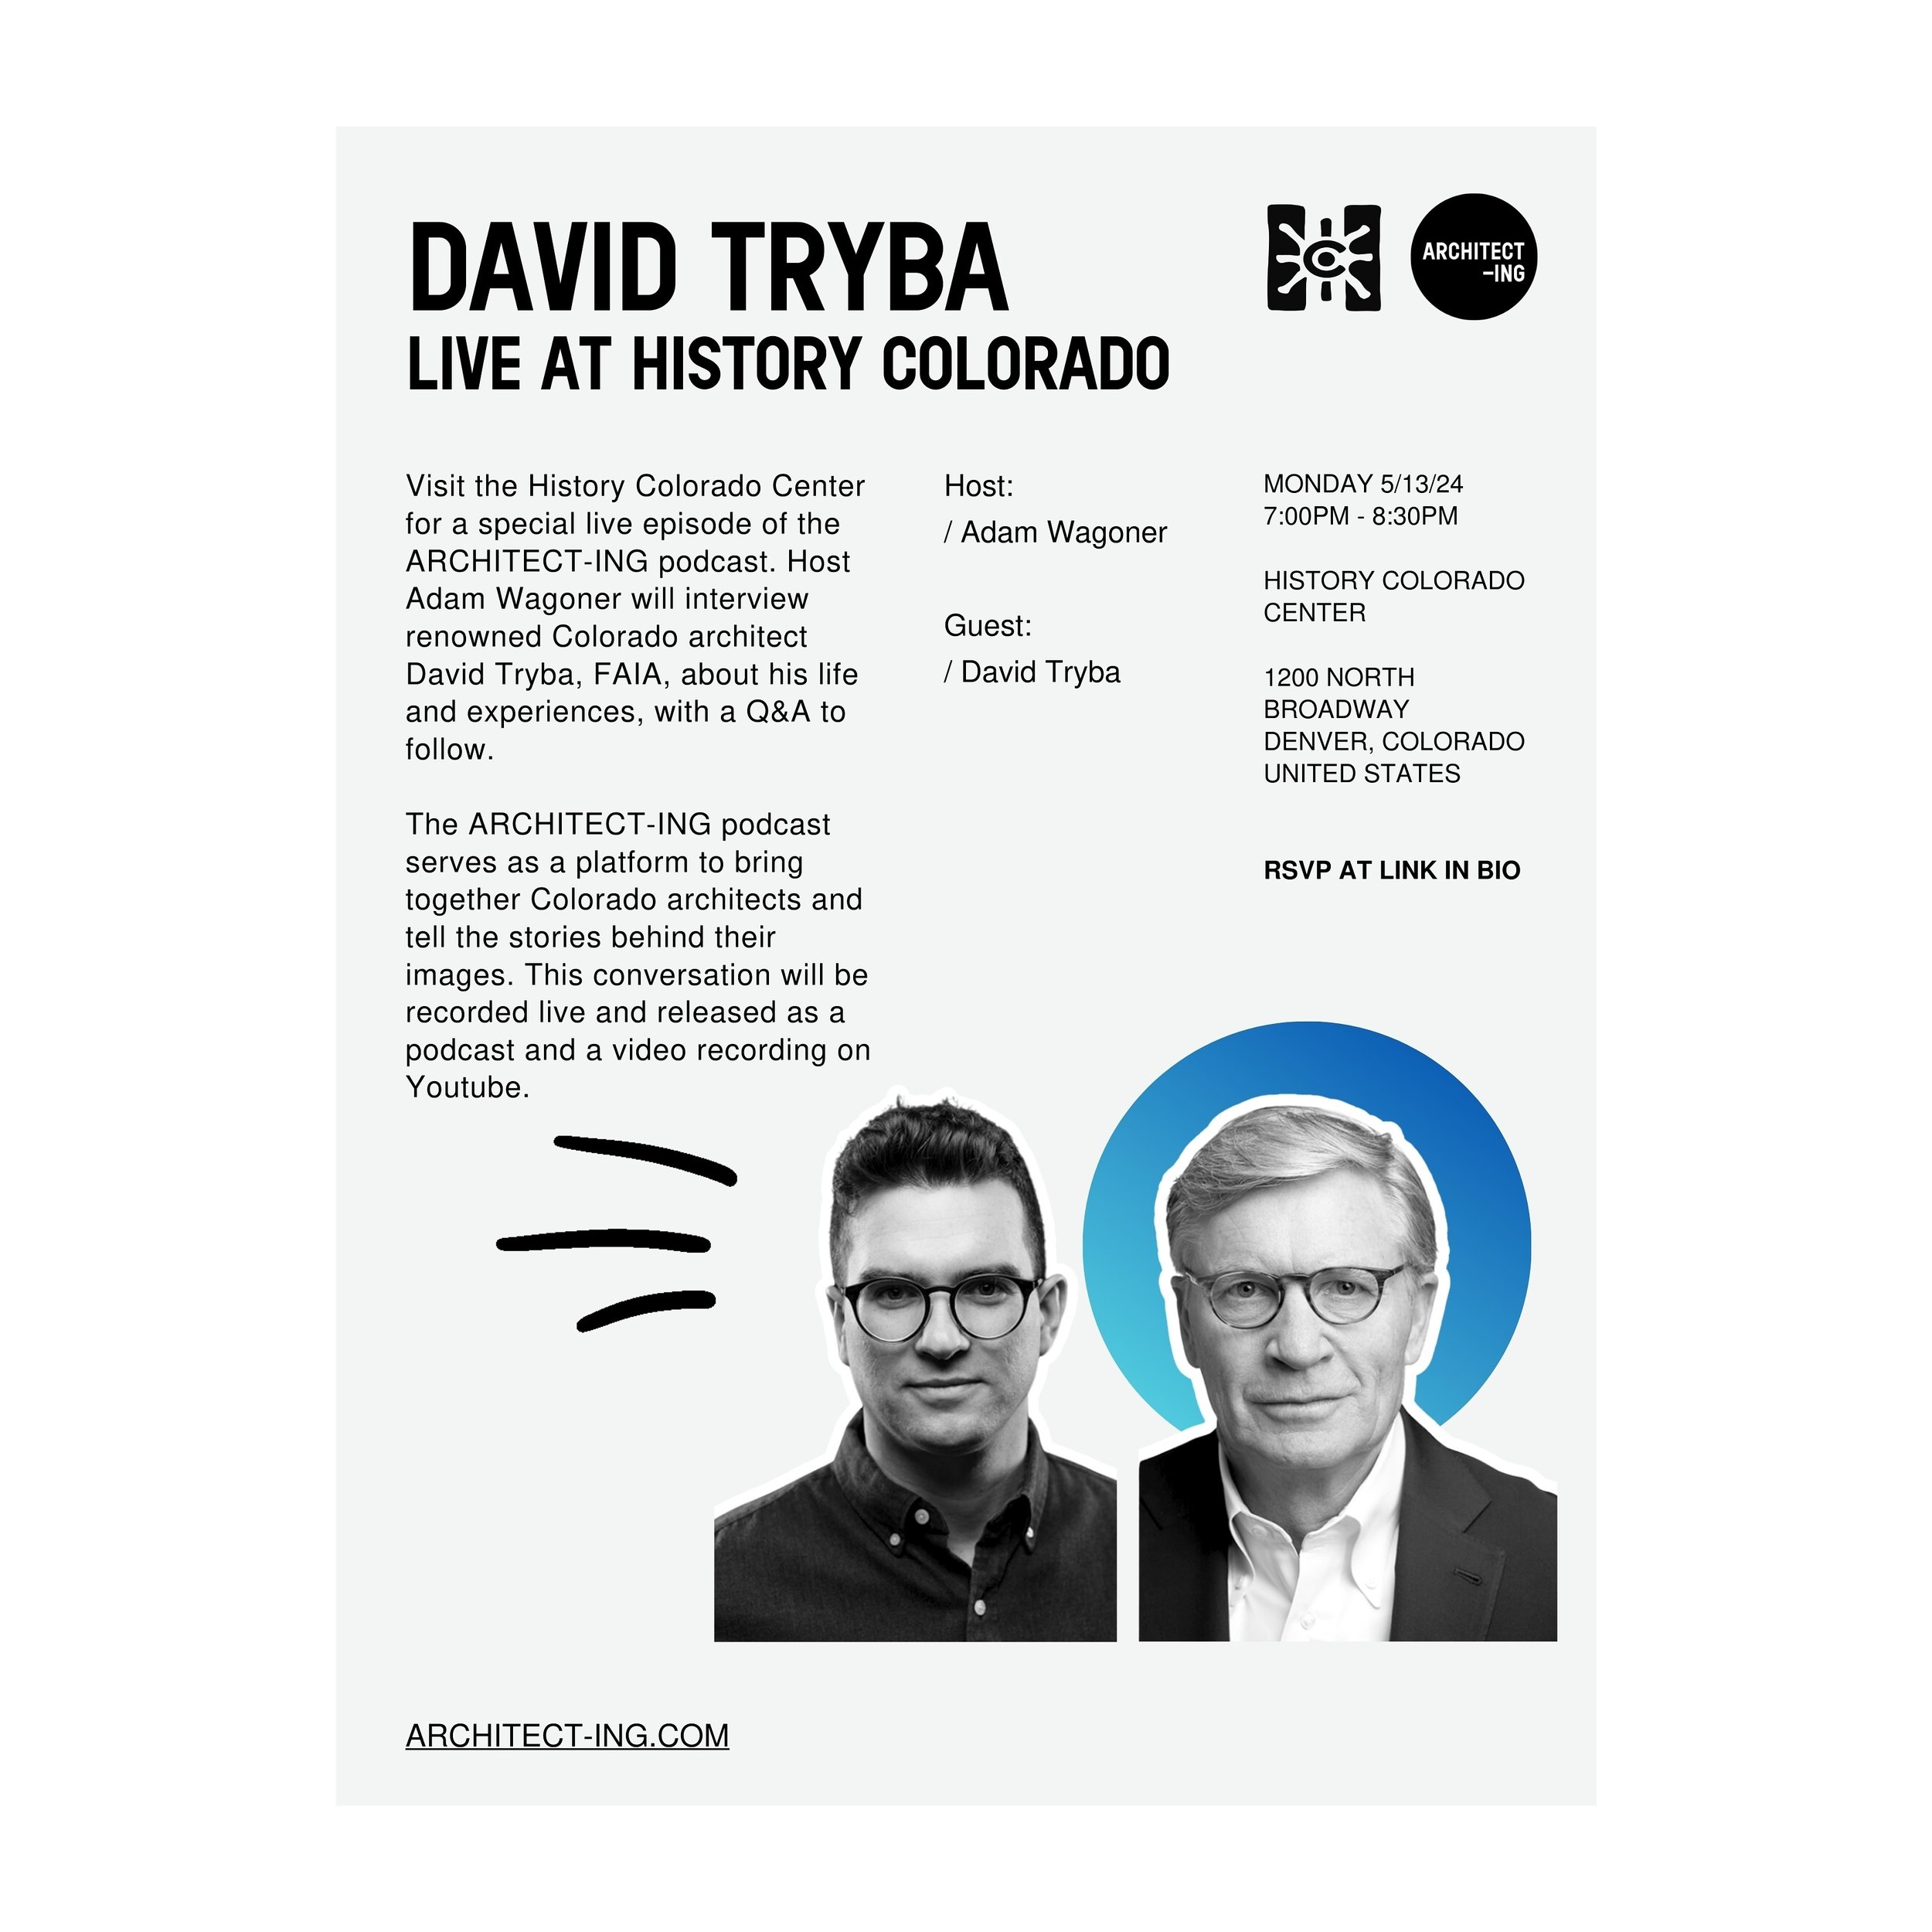 Join us for this exciting live episode recording with David Tryba at History Colorado!